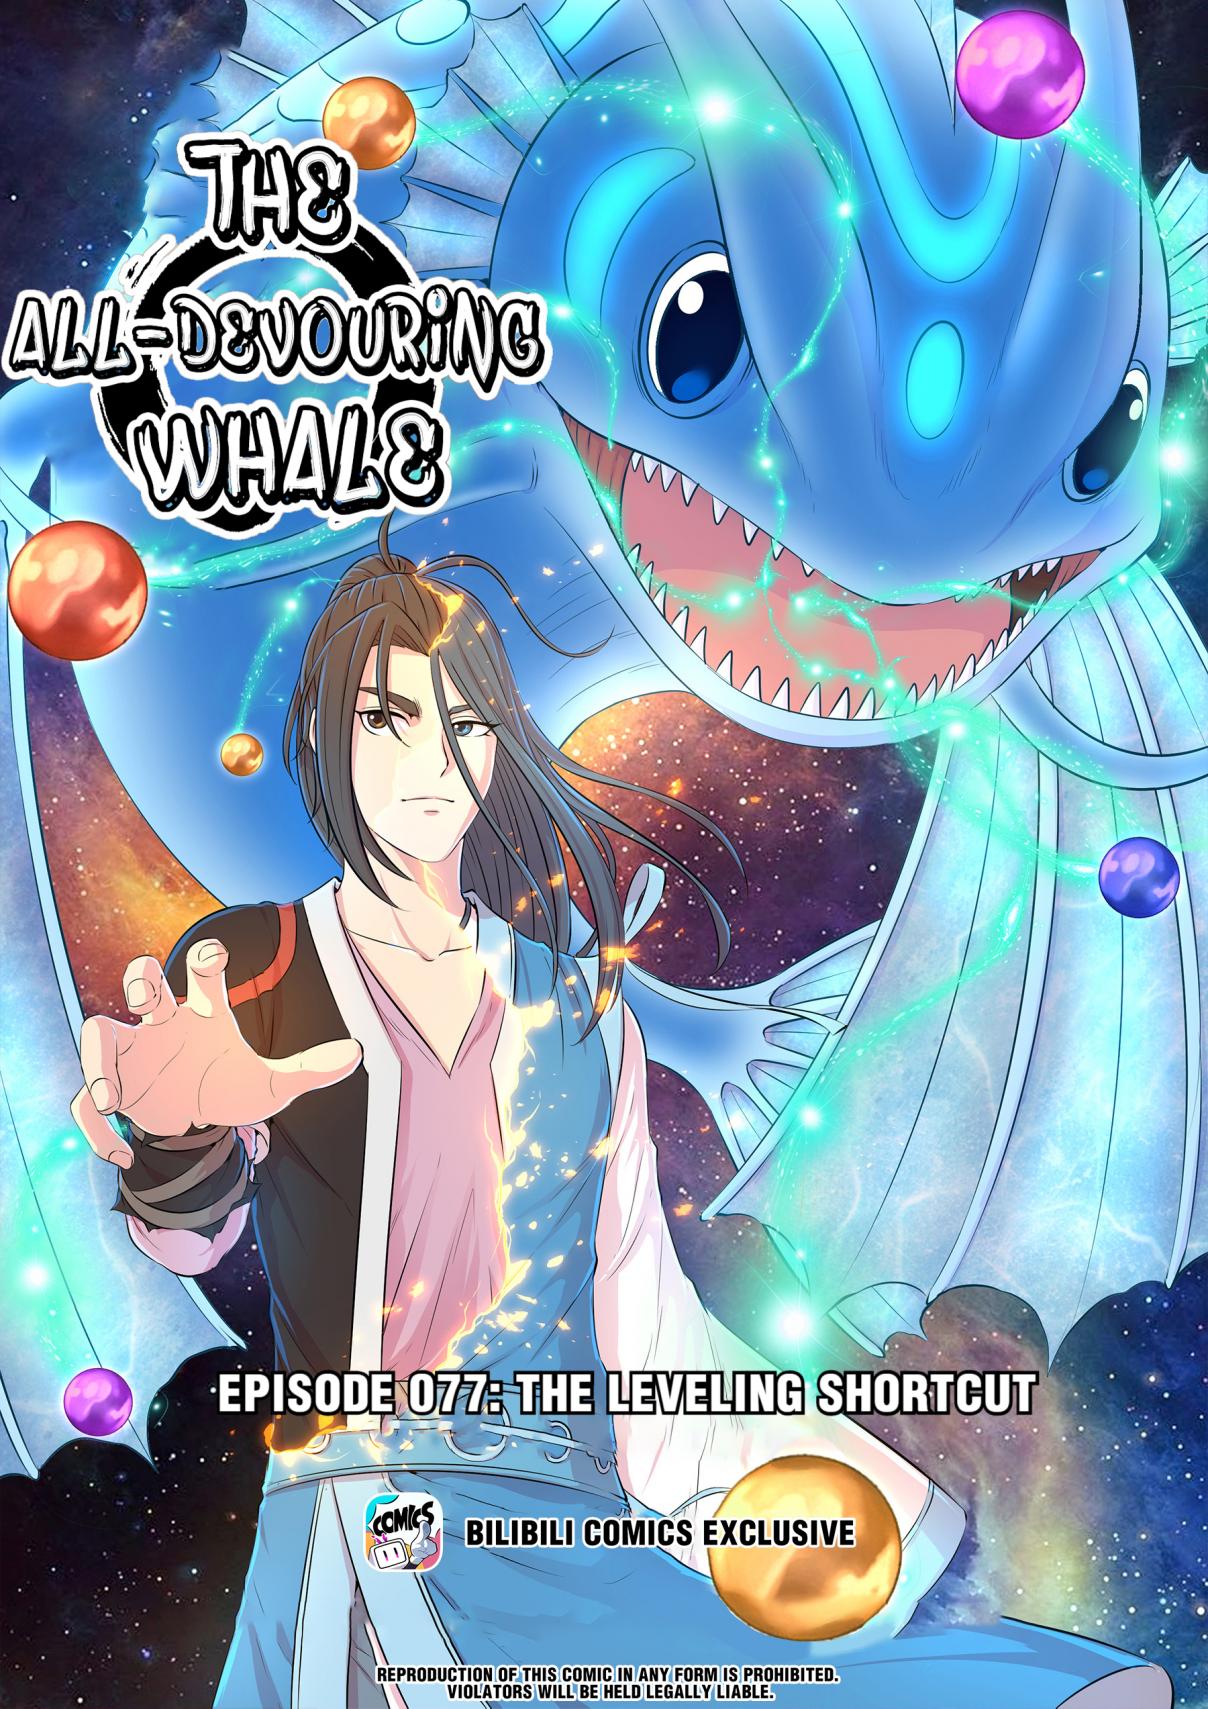 The All-devouring Whale 81.1 The Leveling Shortcut